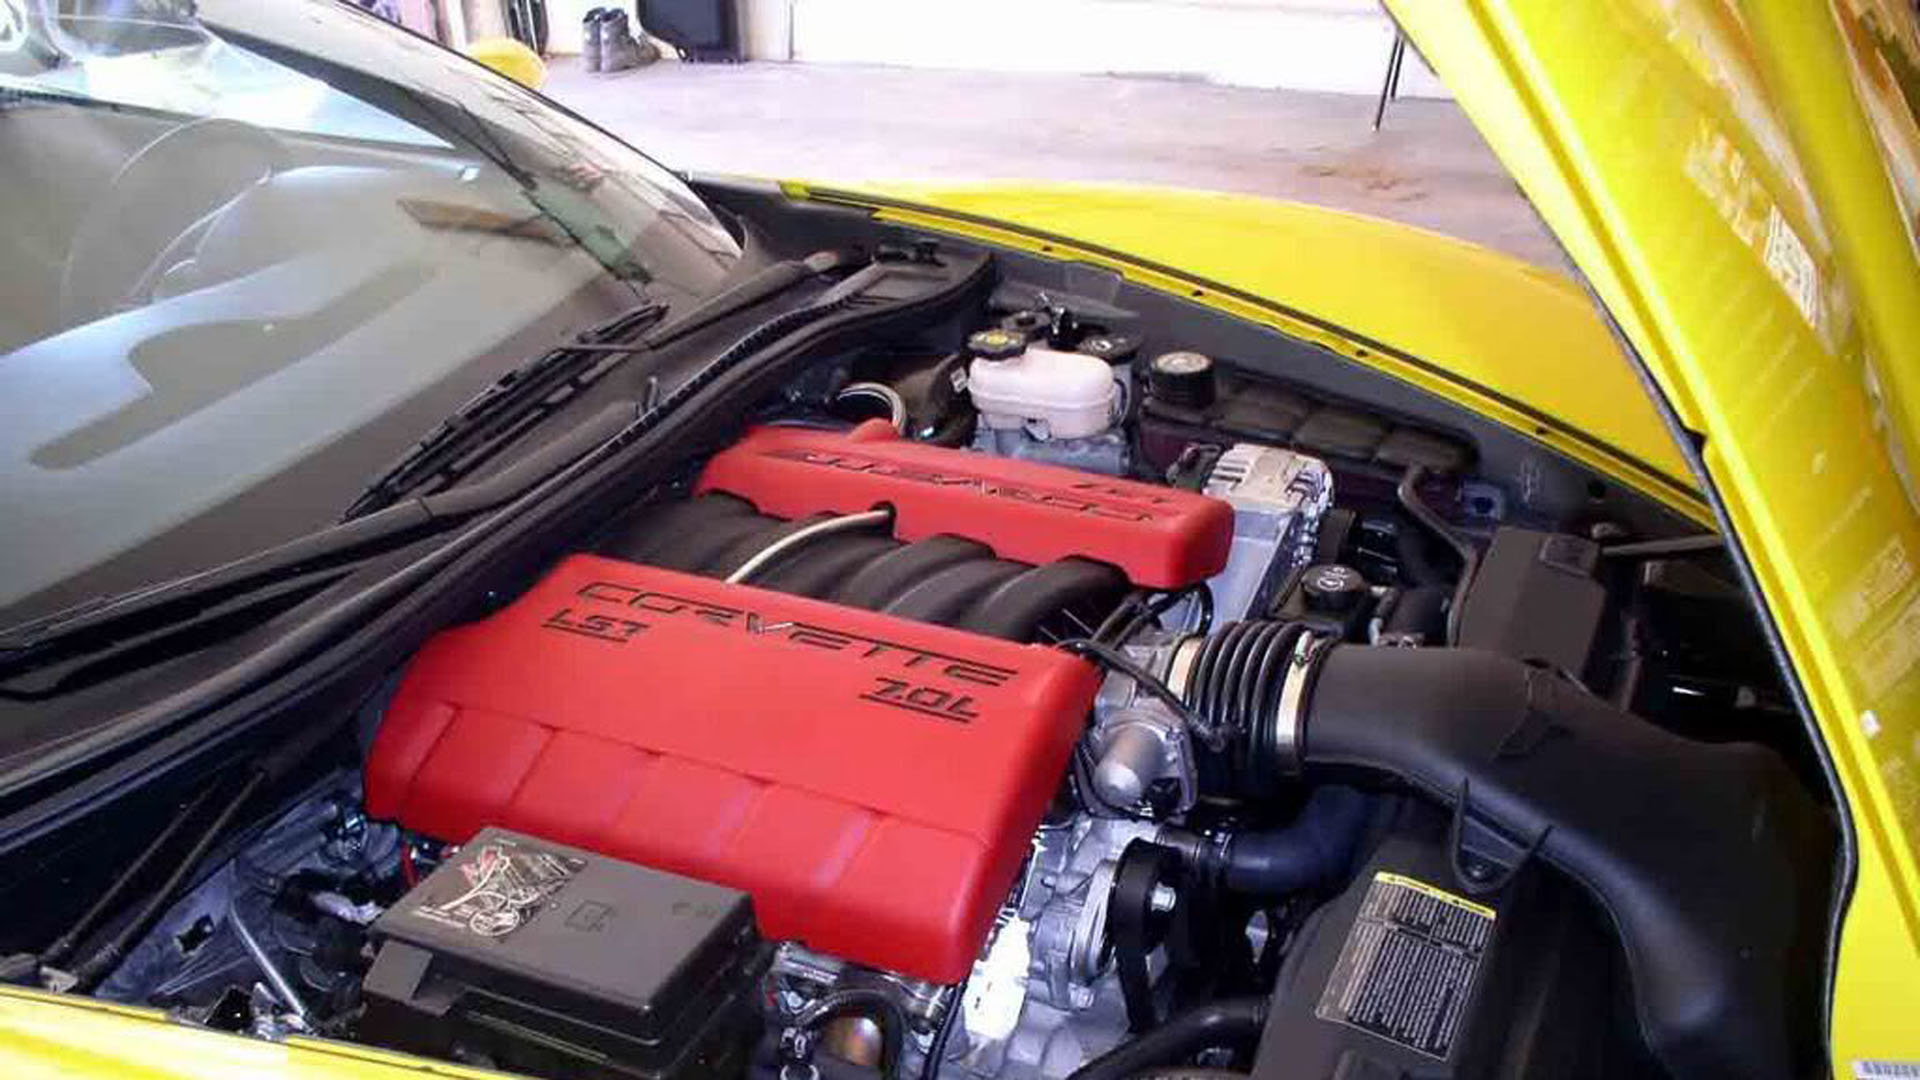 49+ How to open a car hood with a dead battery information